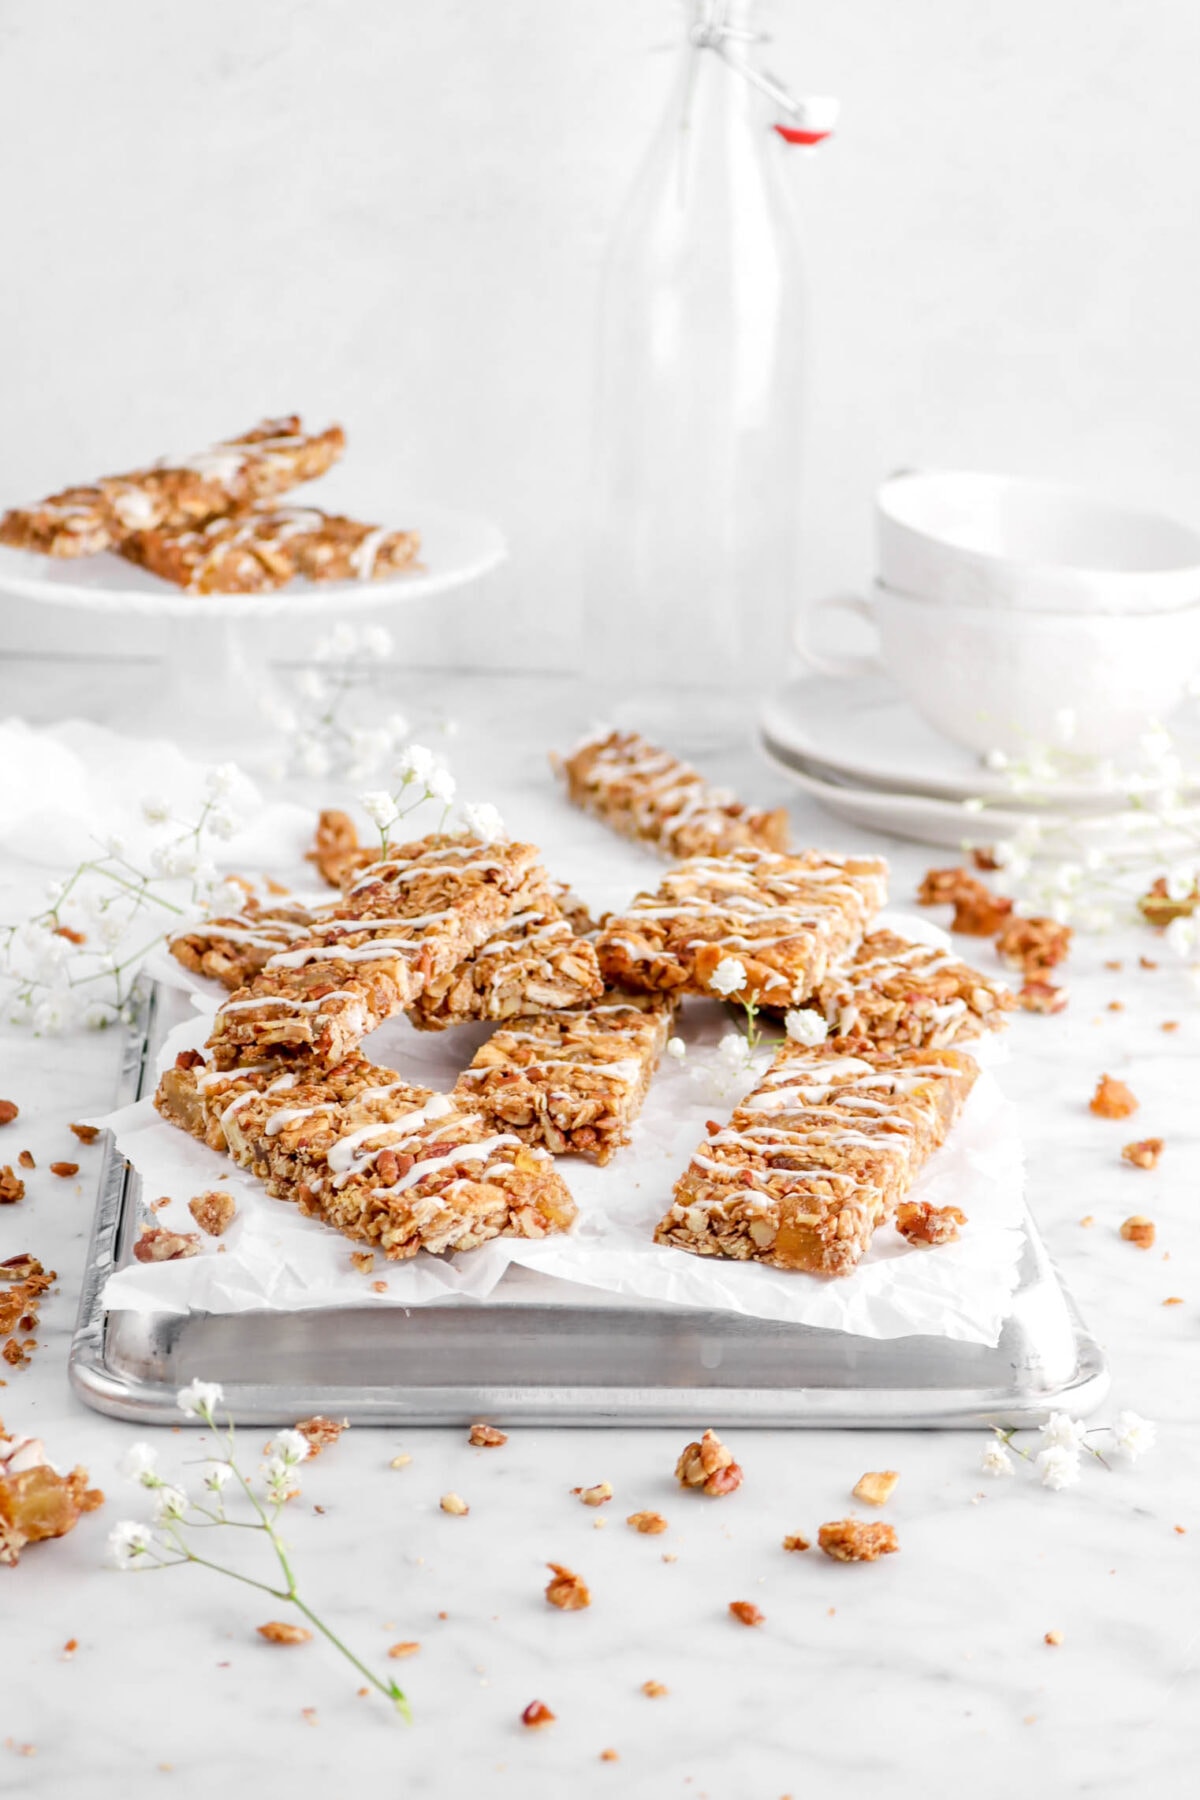 hummingbird granola bars on sheet pan with parchment paper, flowers, plates, and mugs behind